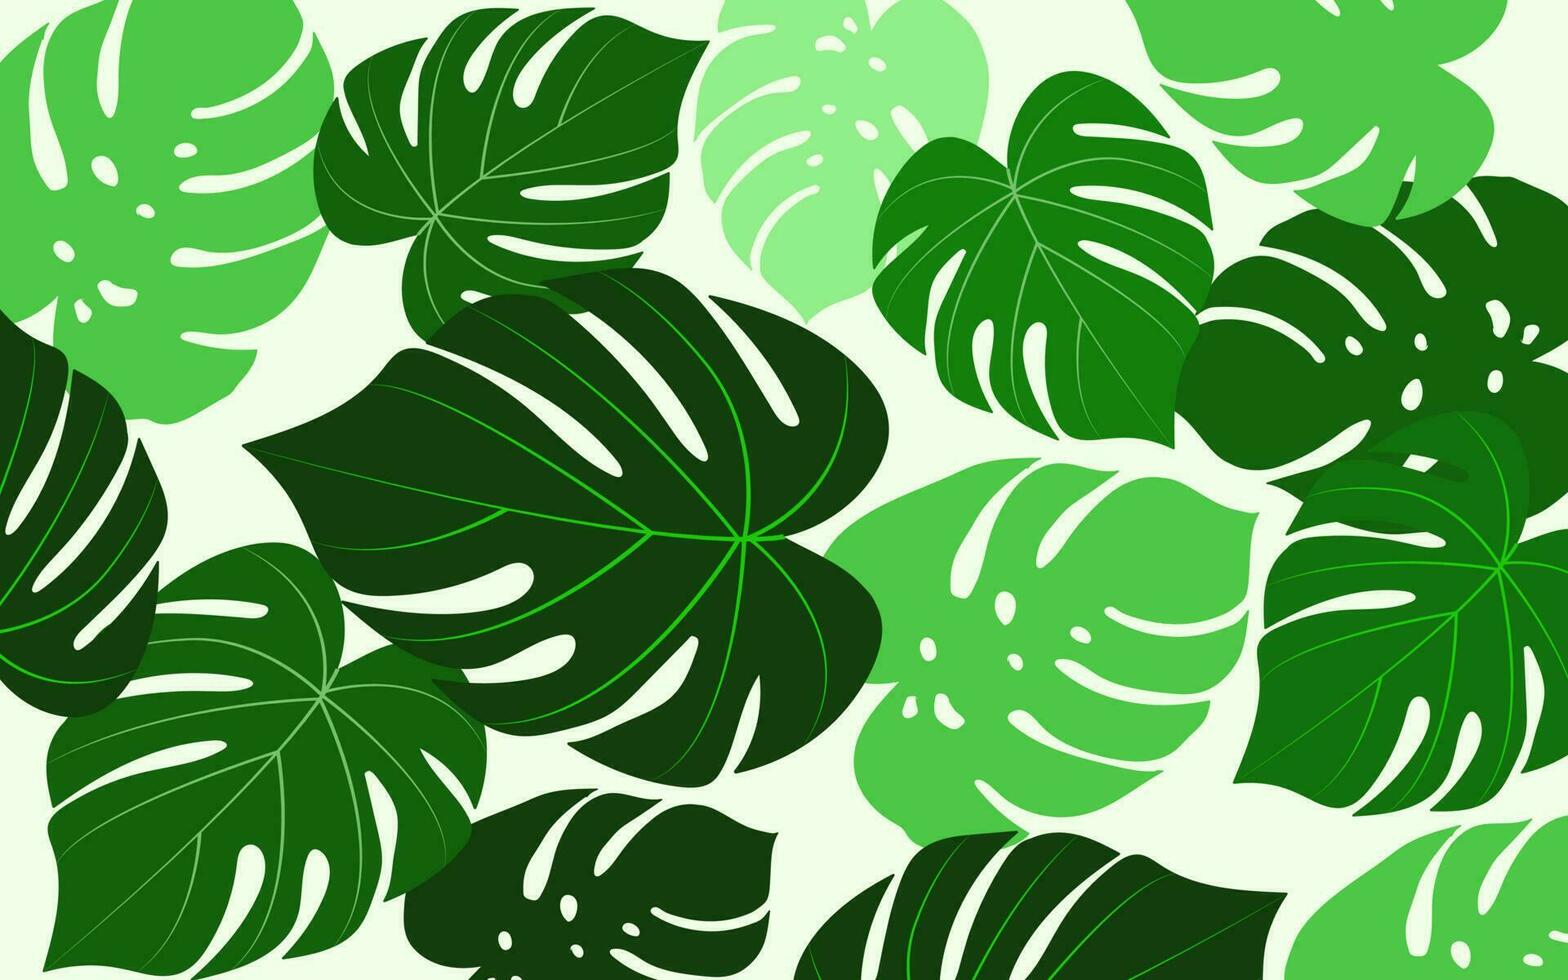 Abstract Background concept and green leaves plant simple modern design. Vector illustration. Can be used for your work.